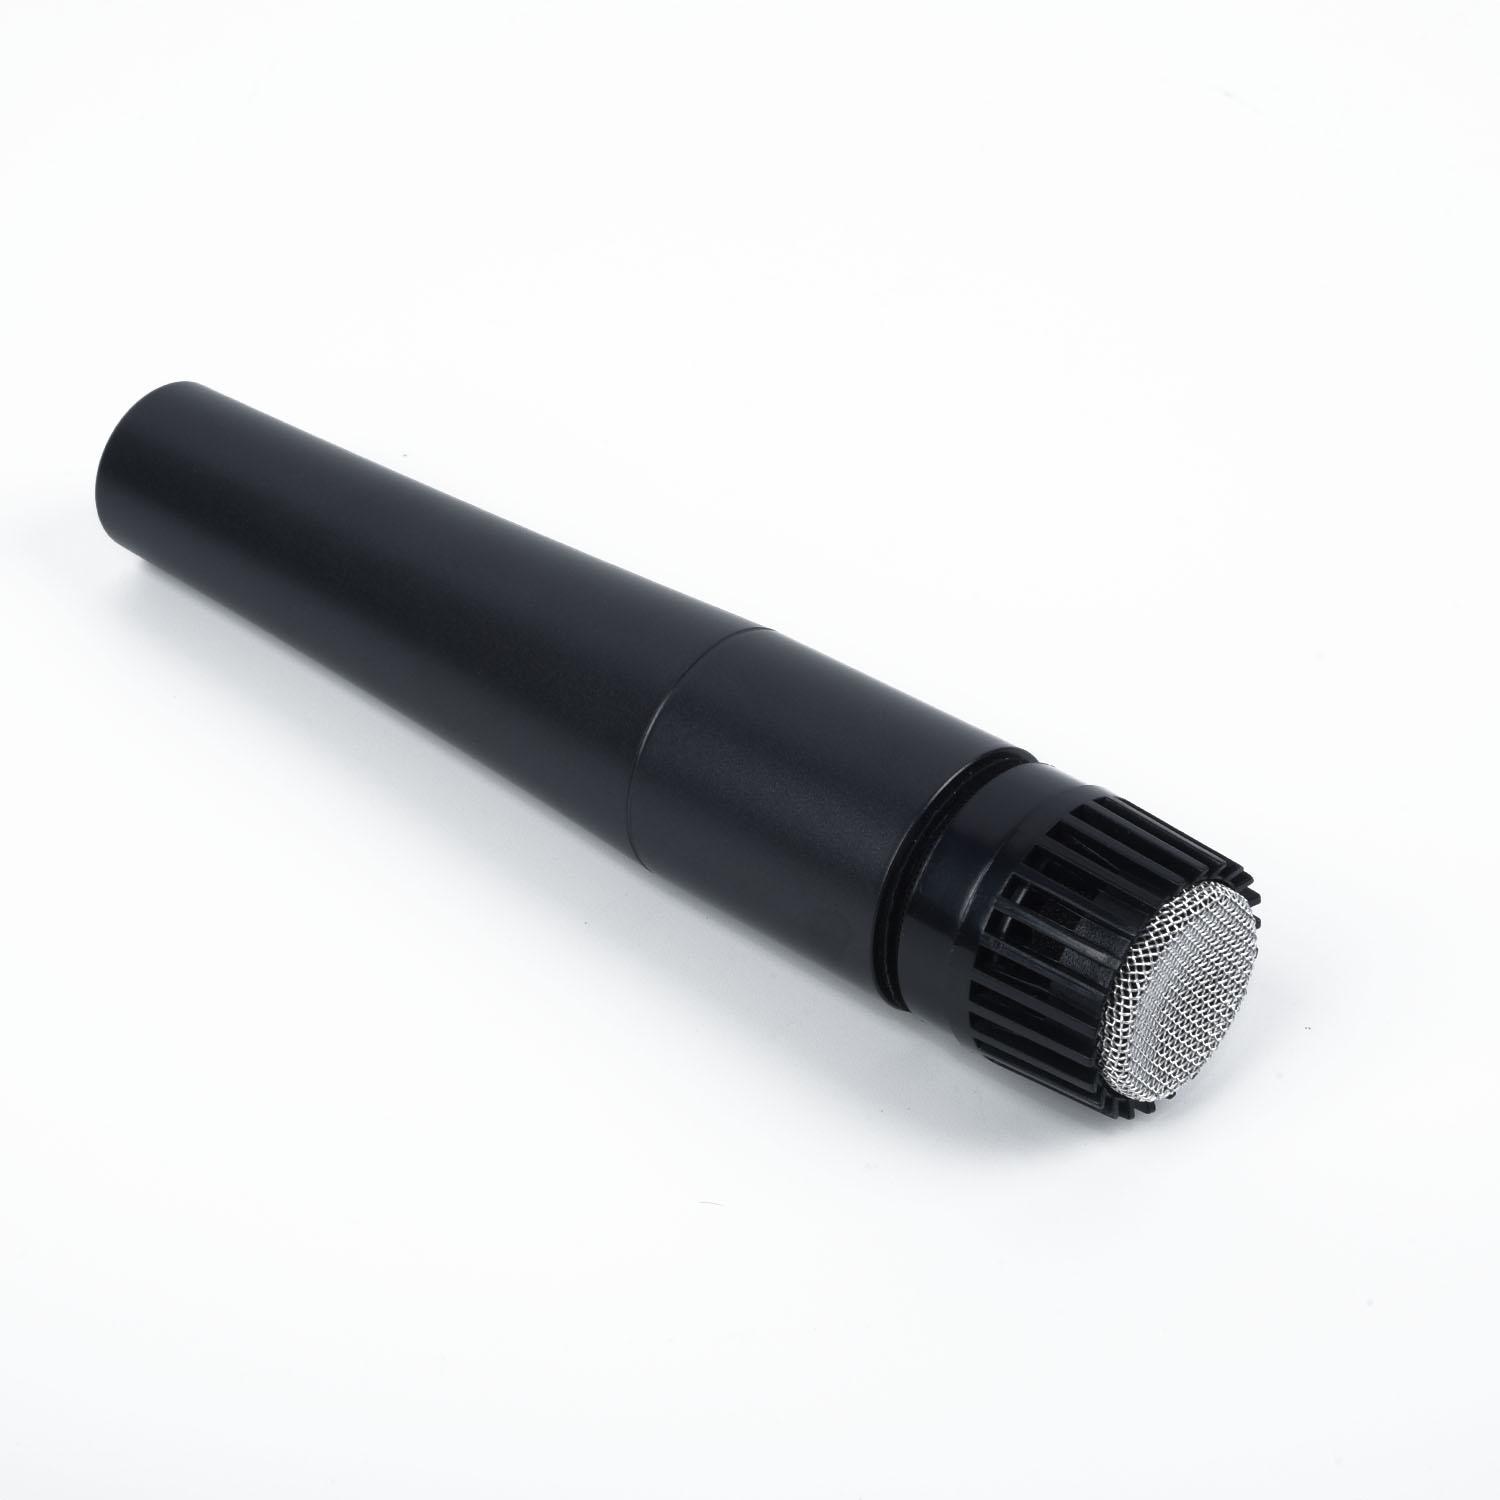 40Hz-16kHz Microphone Useful TypeDynamic For Pyle-Pro Wired PDMIC78 Brand Handheld Microphone outdoor publicity